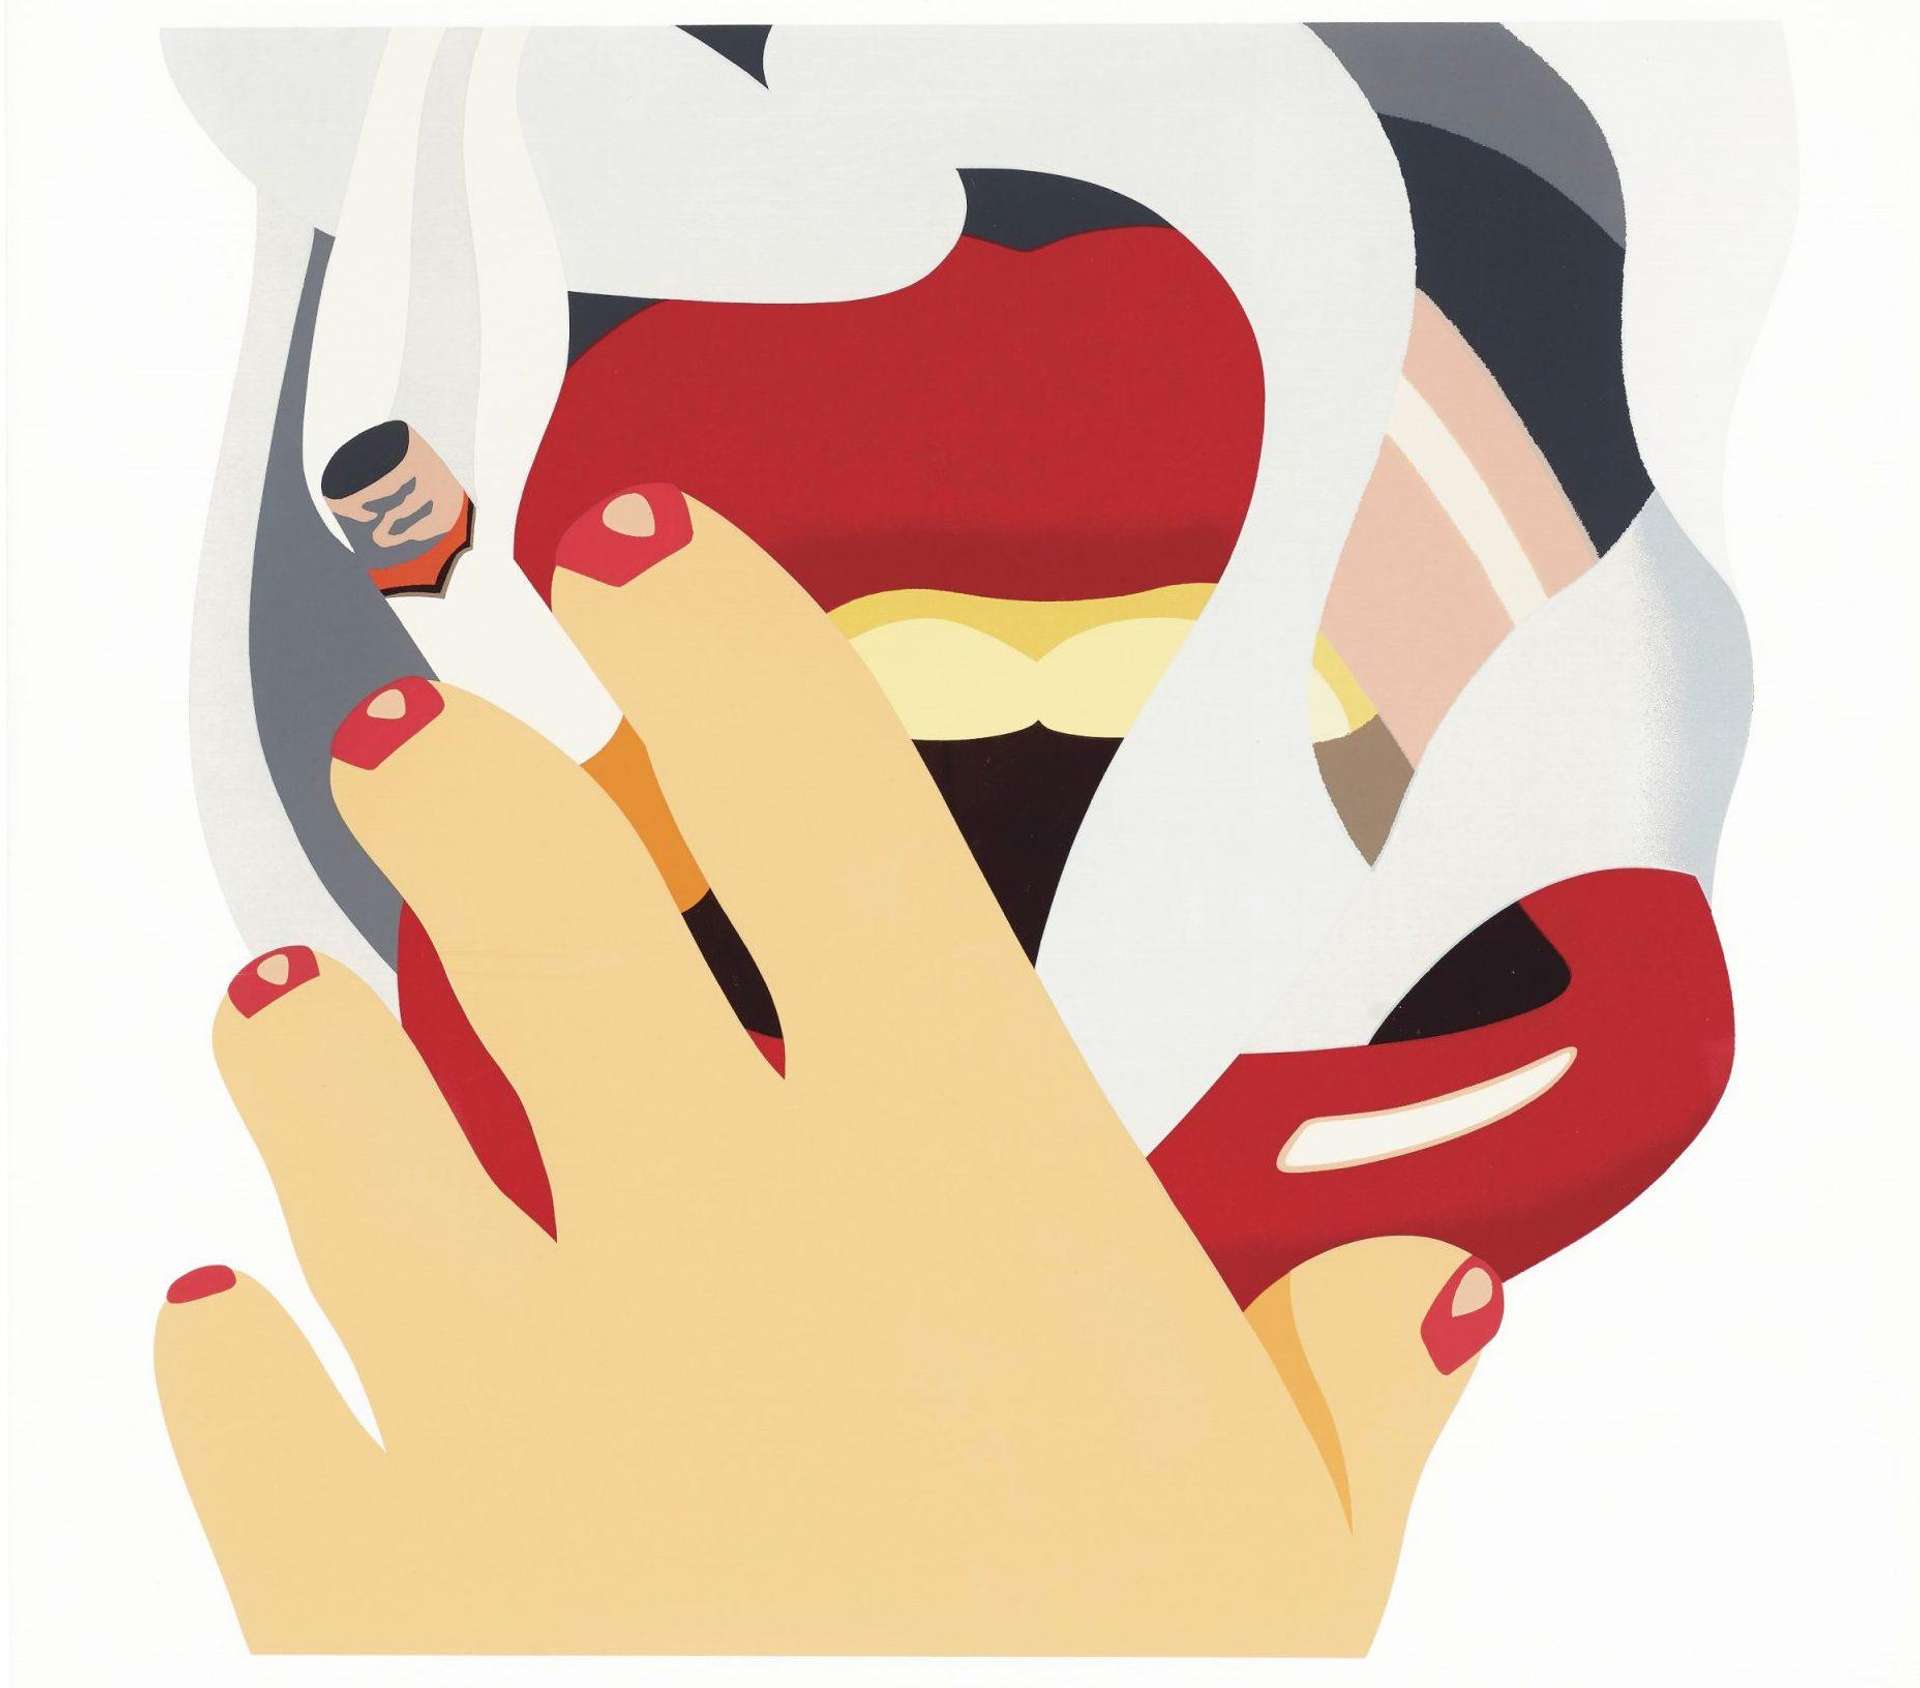 A cartoon-style artwork featuring a close-up of red lips with a cigarette held between them. The mouth exhales smoke in swirling patterns that encircle and envelop the lips and mouth.